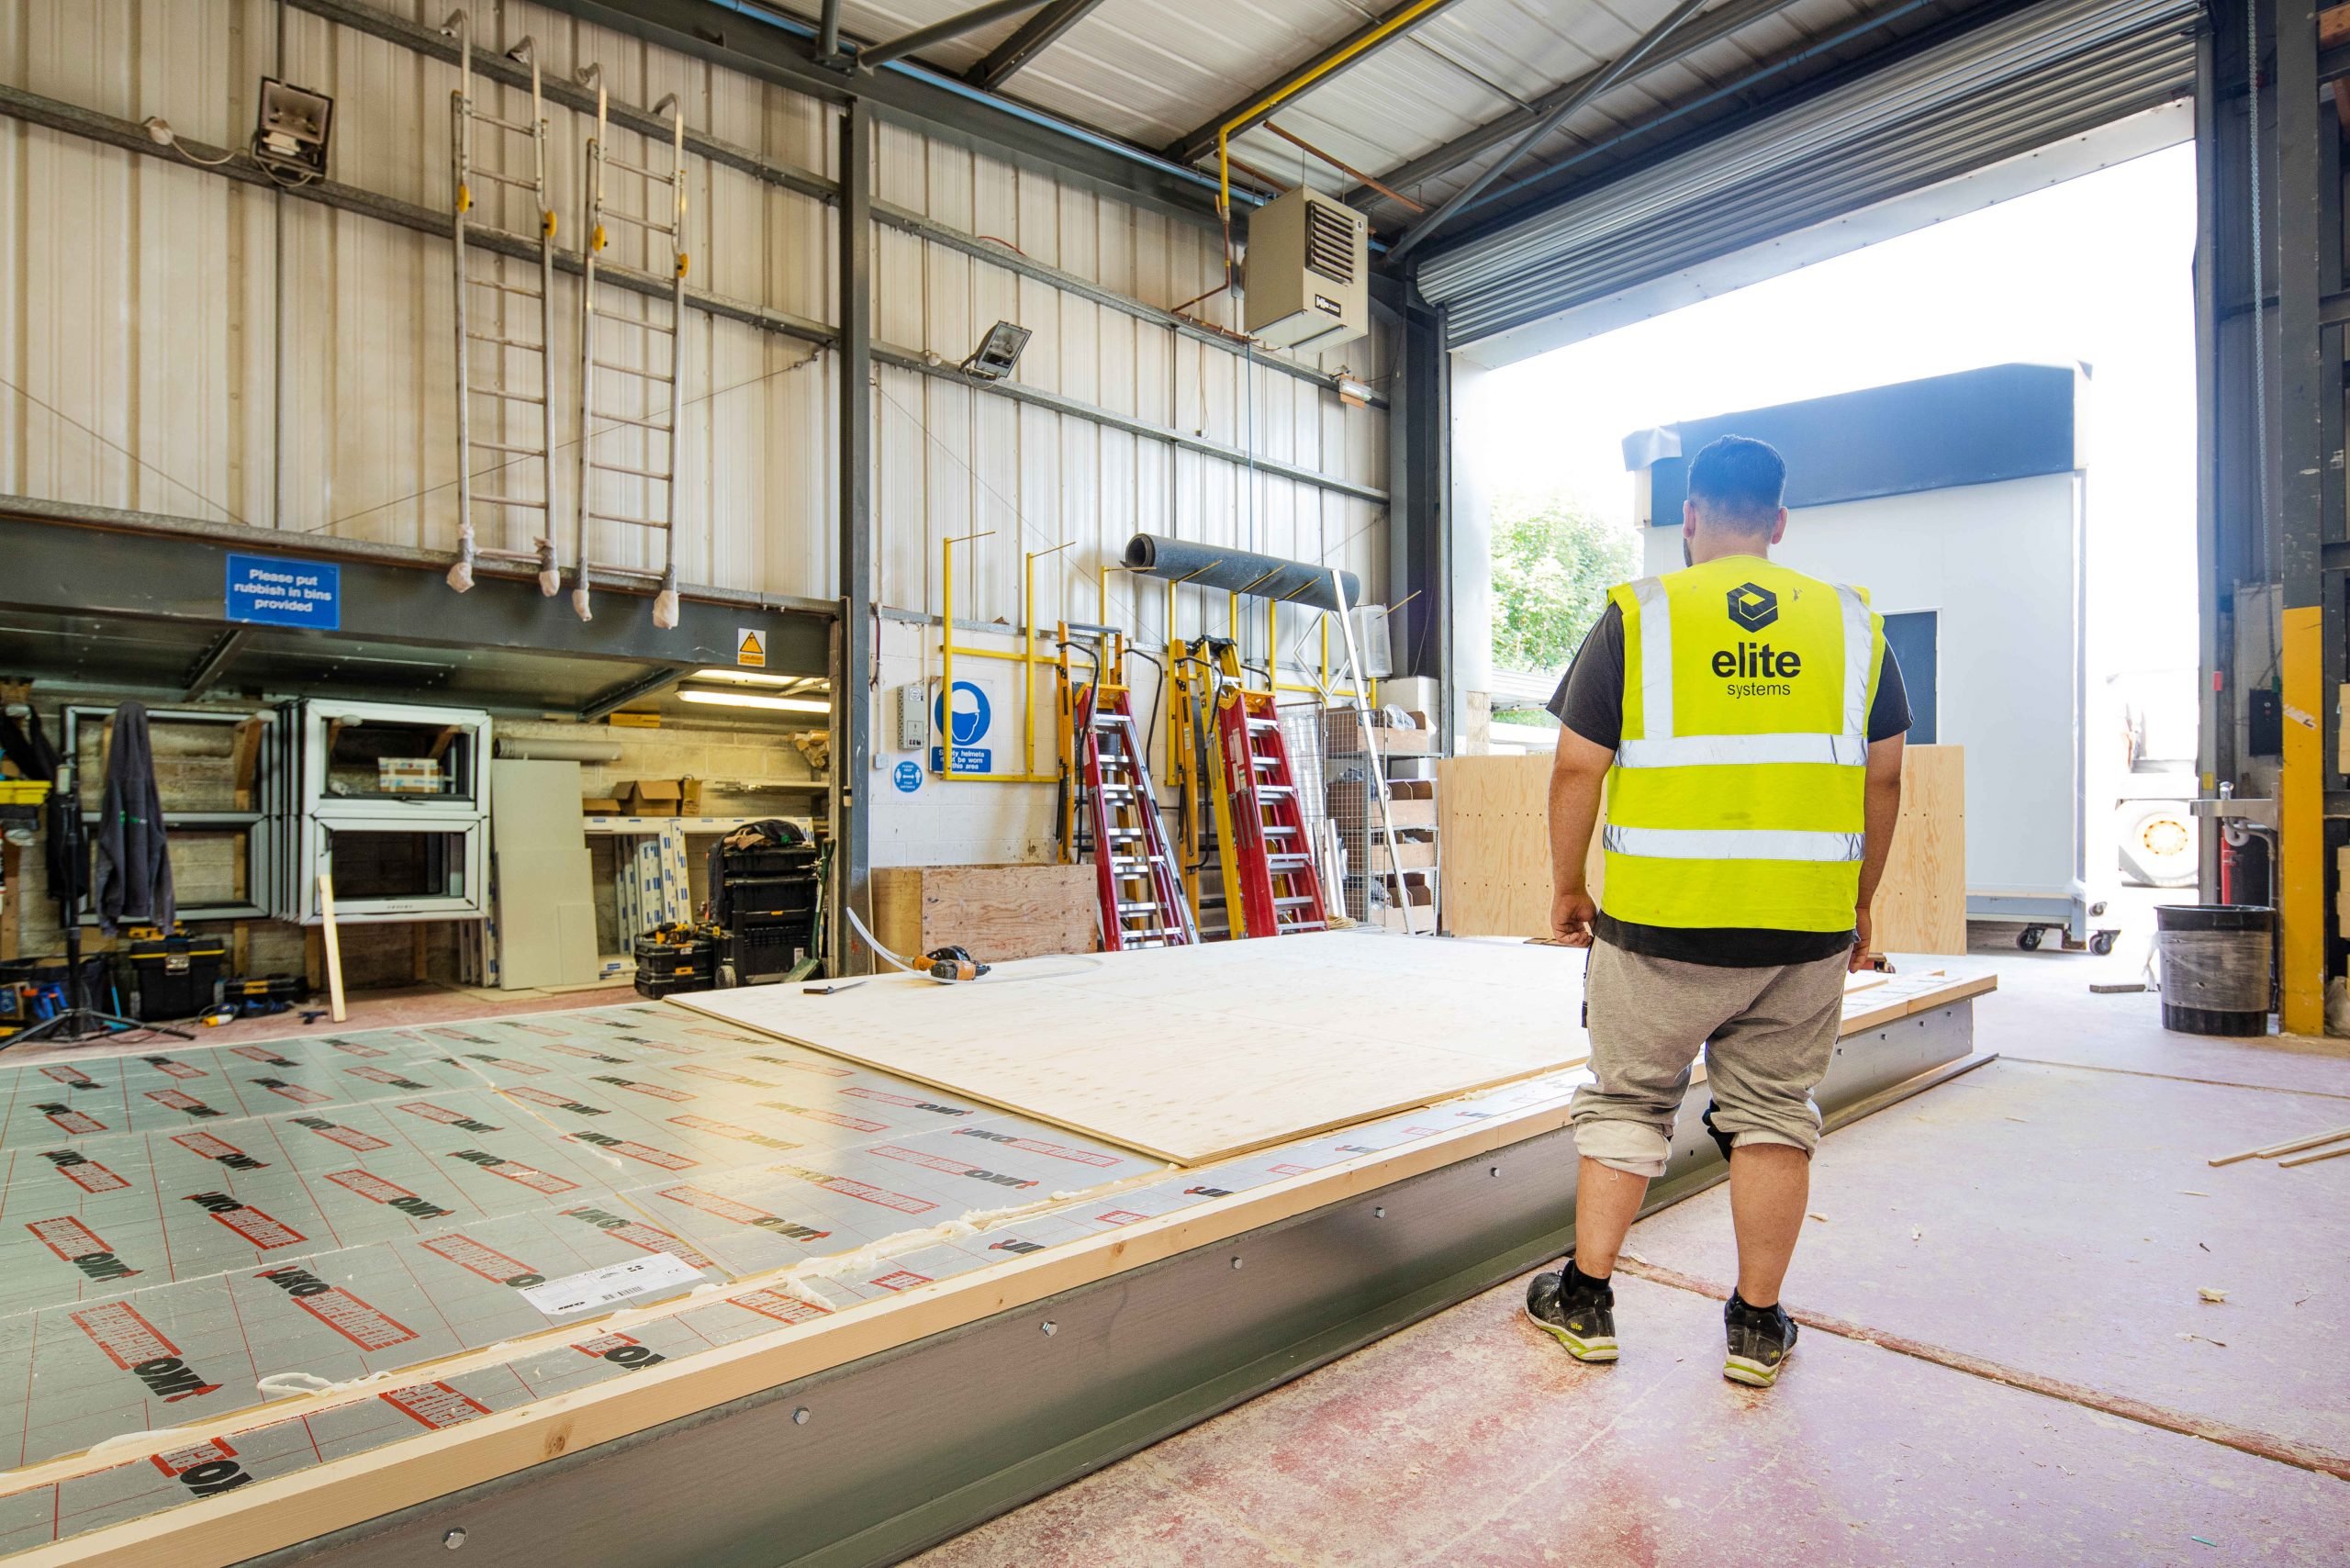 Image shows a factory floor with a flat-pack modular building whilst another is leaving the factory. A factory worker stands in high vis clothing watching to make sure no modular building mistakes occur